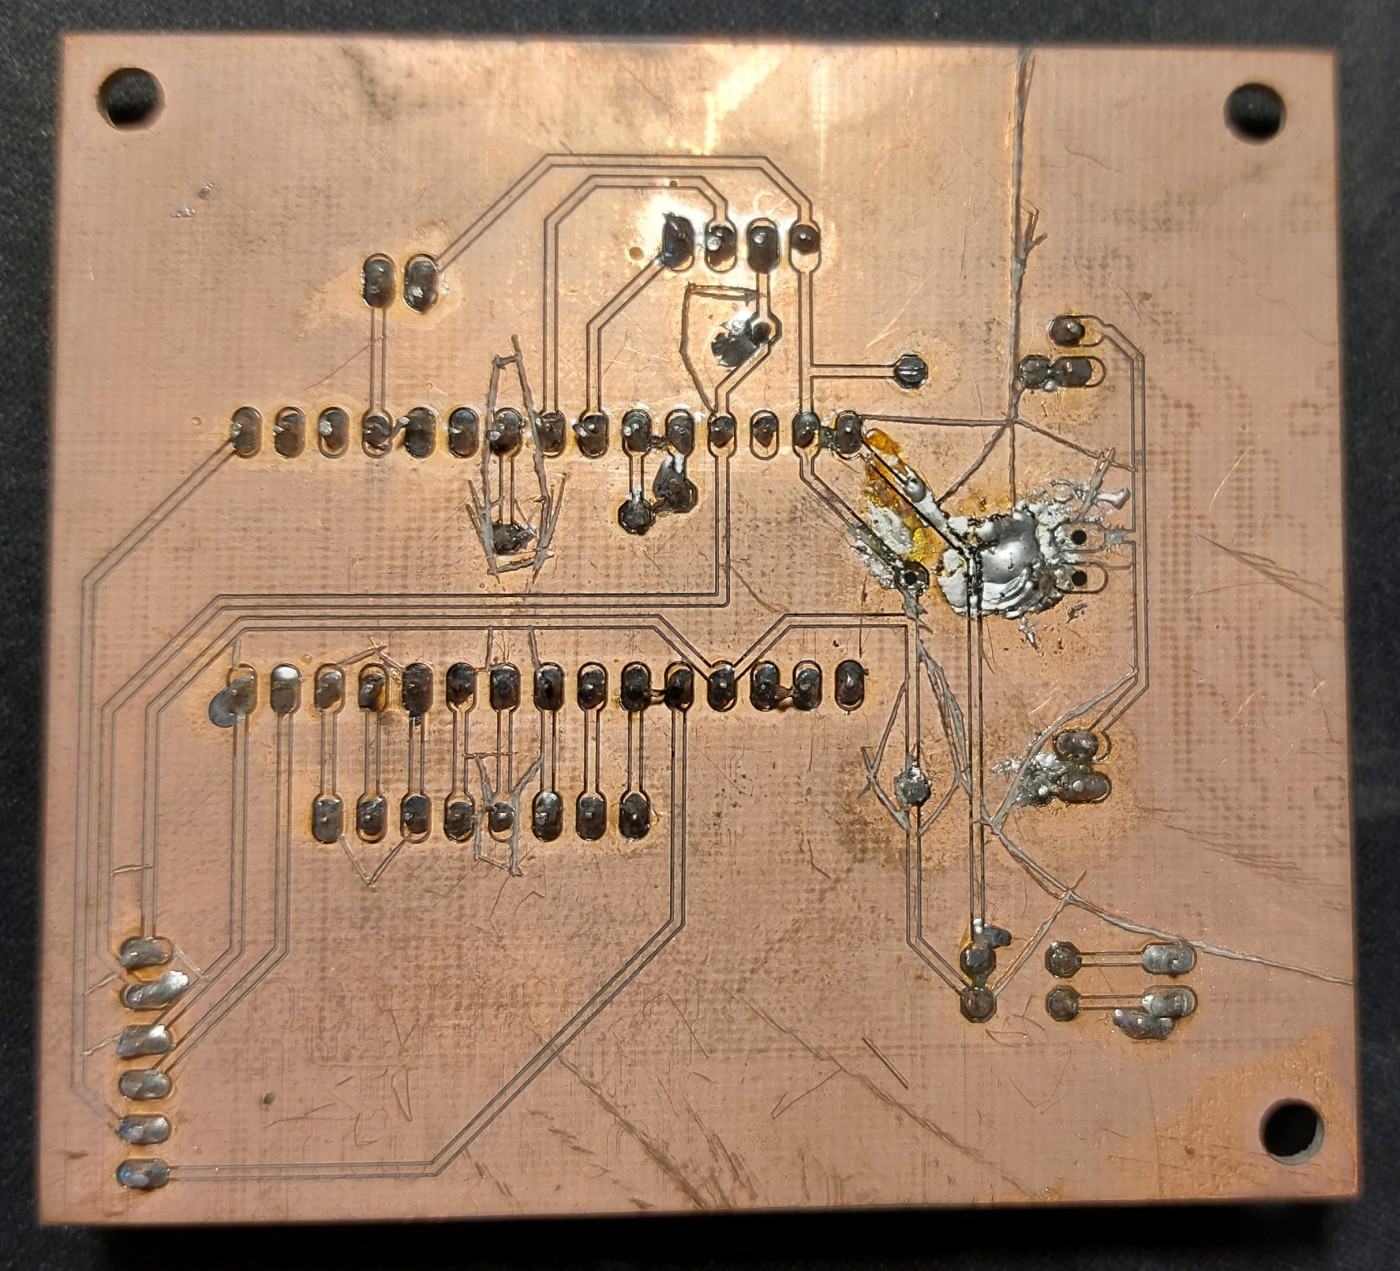 The first version of the oven control board from the bottom